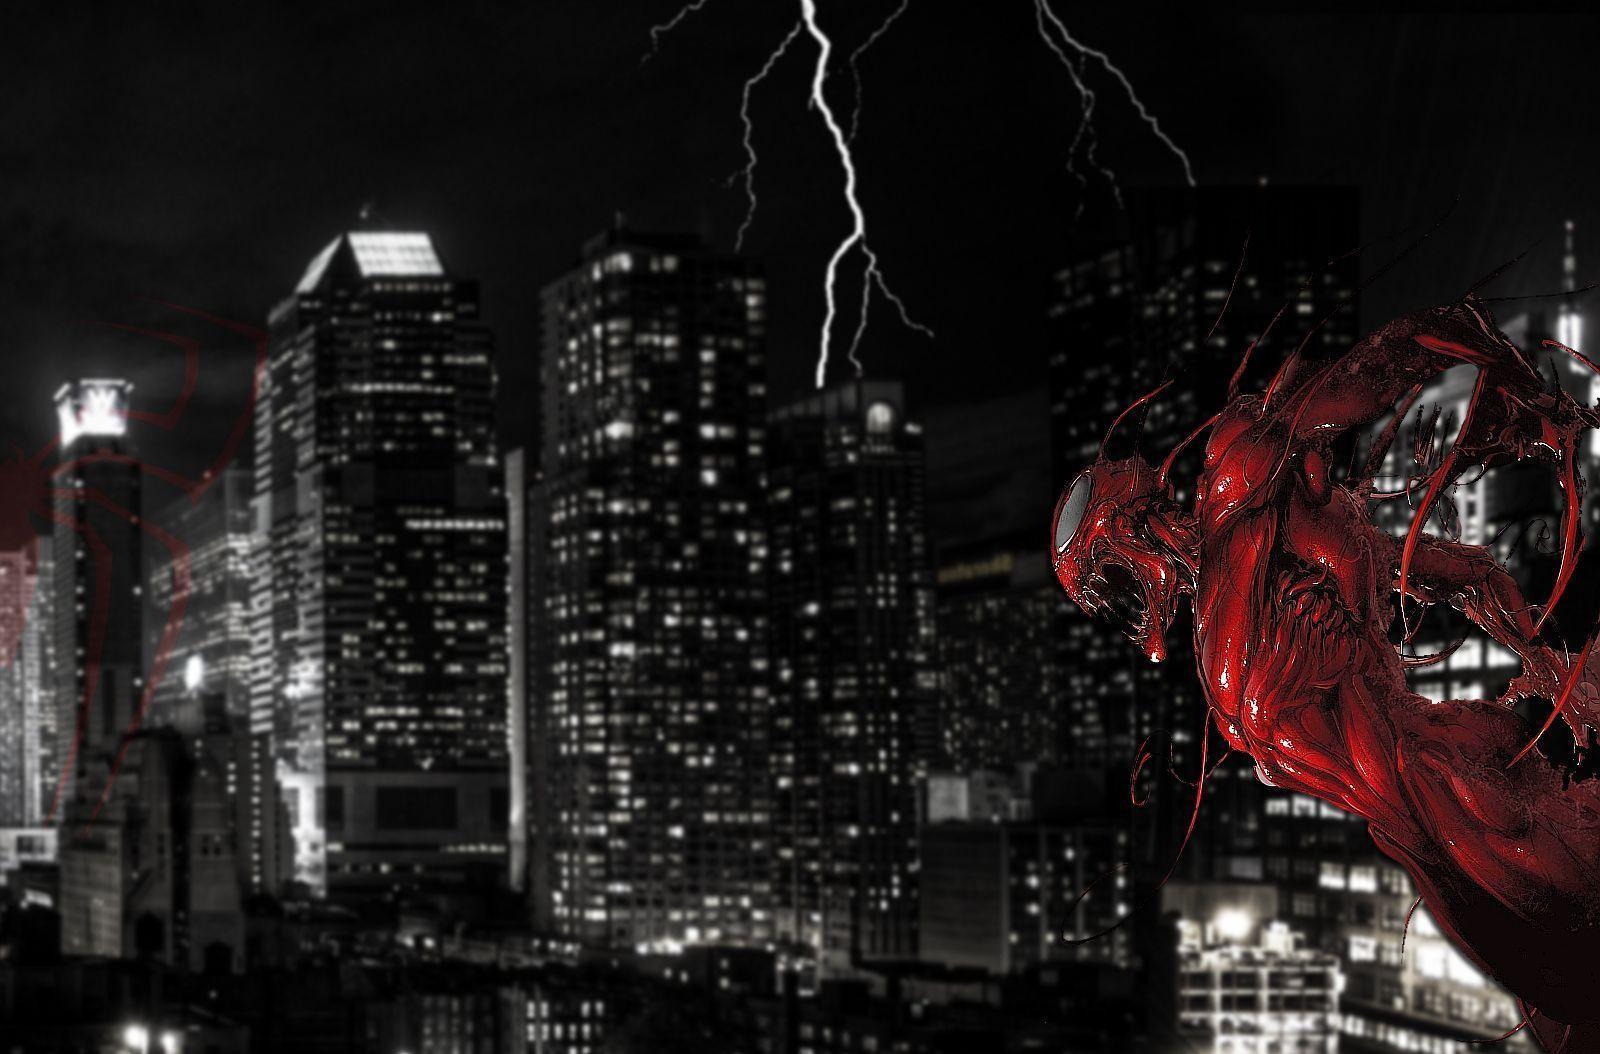 Carnage Wallpapers